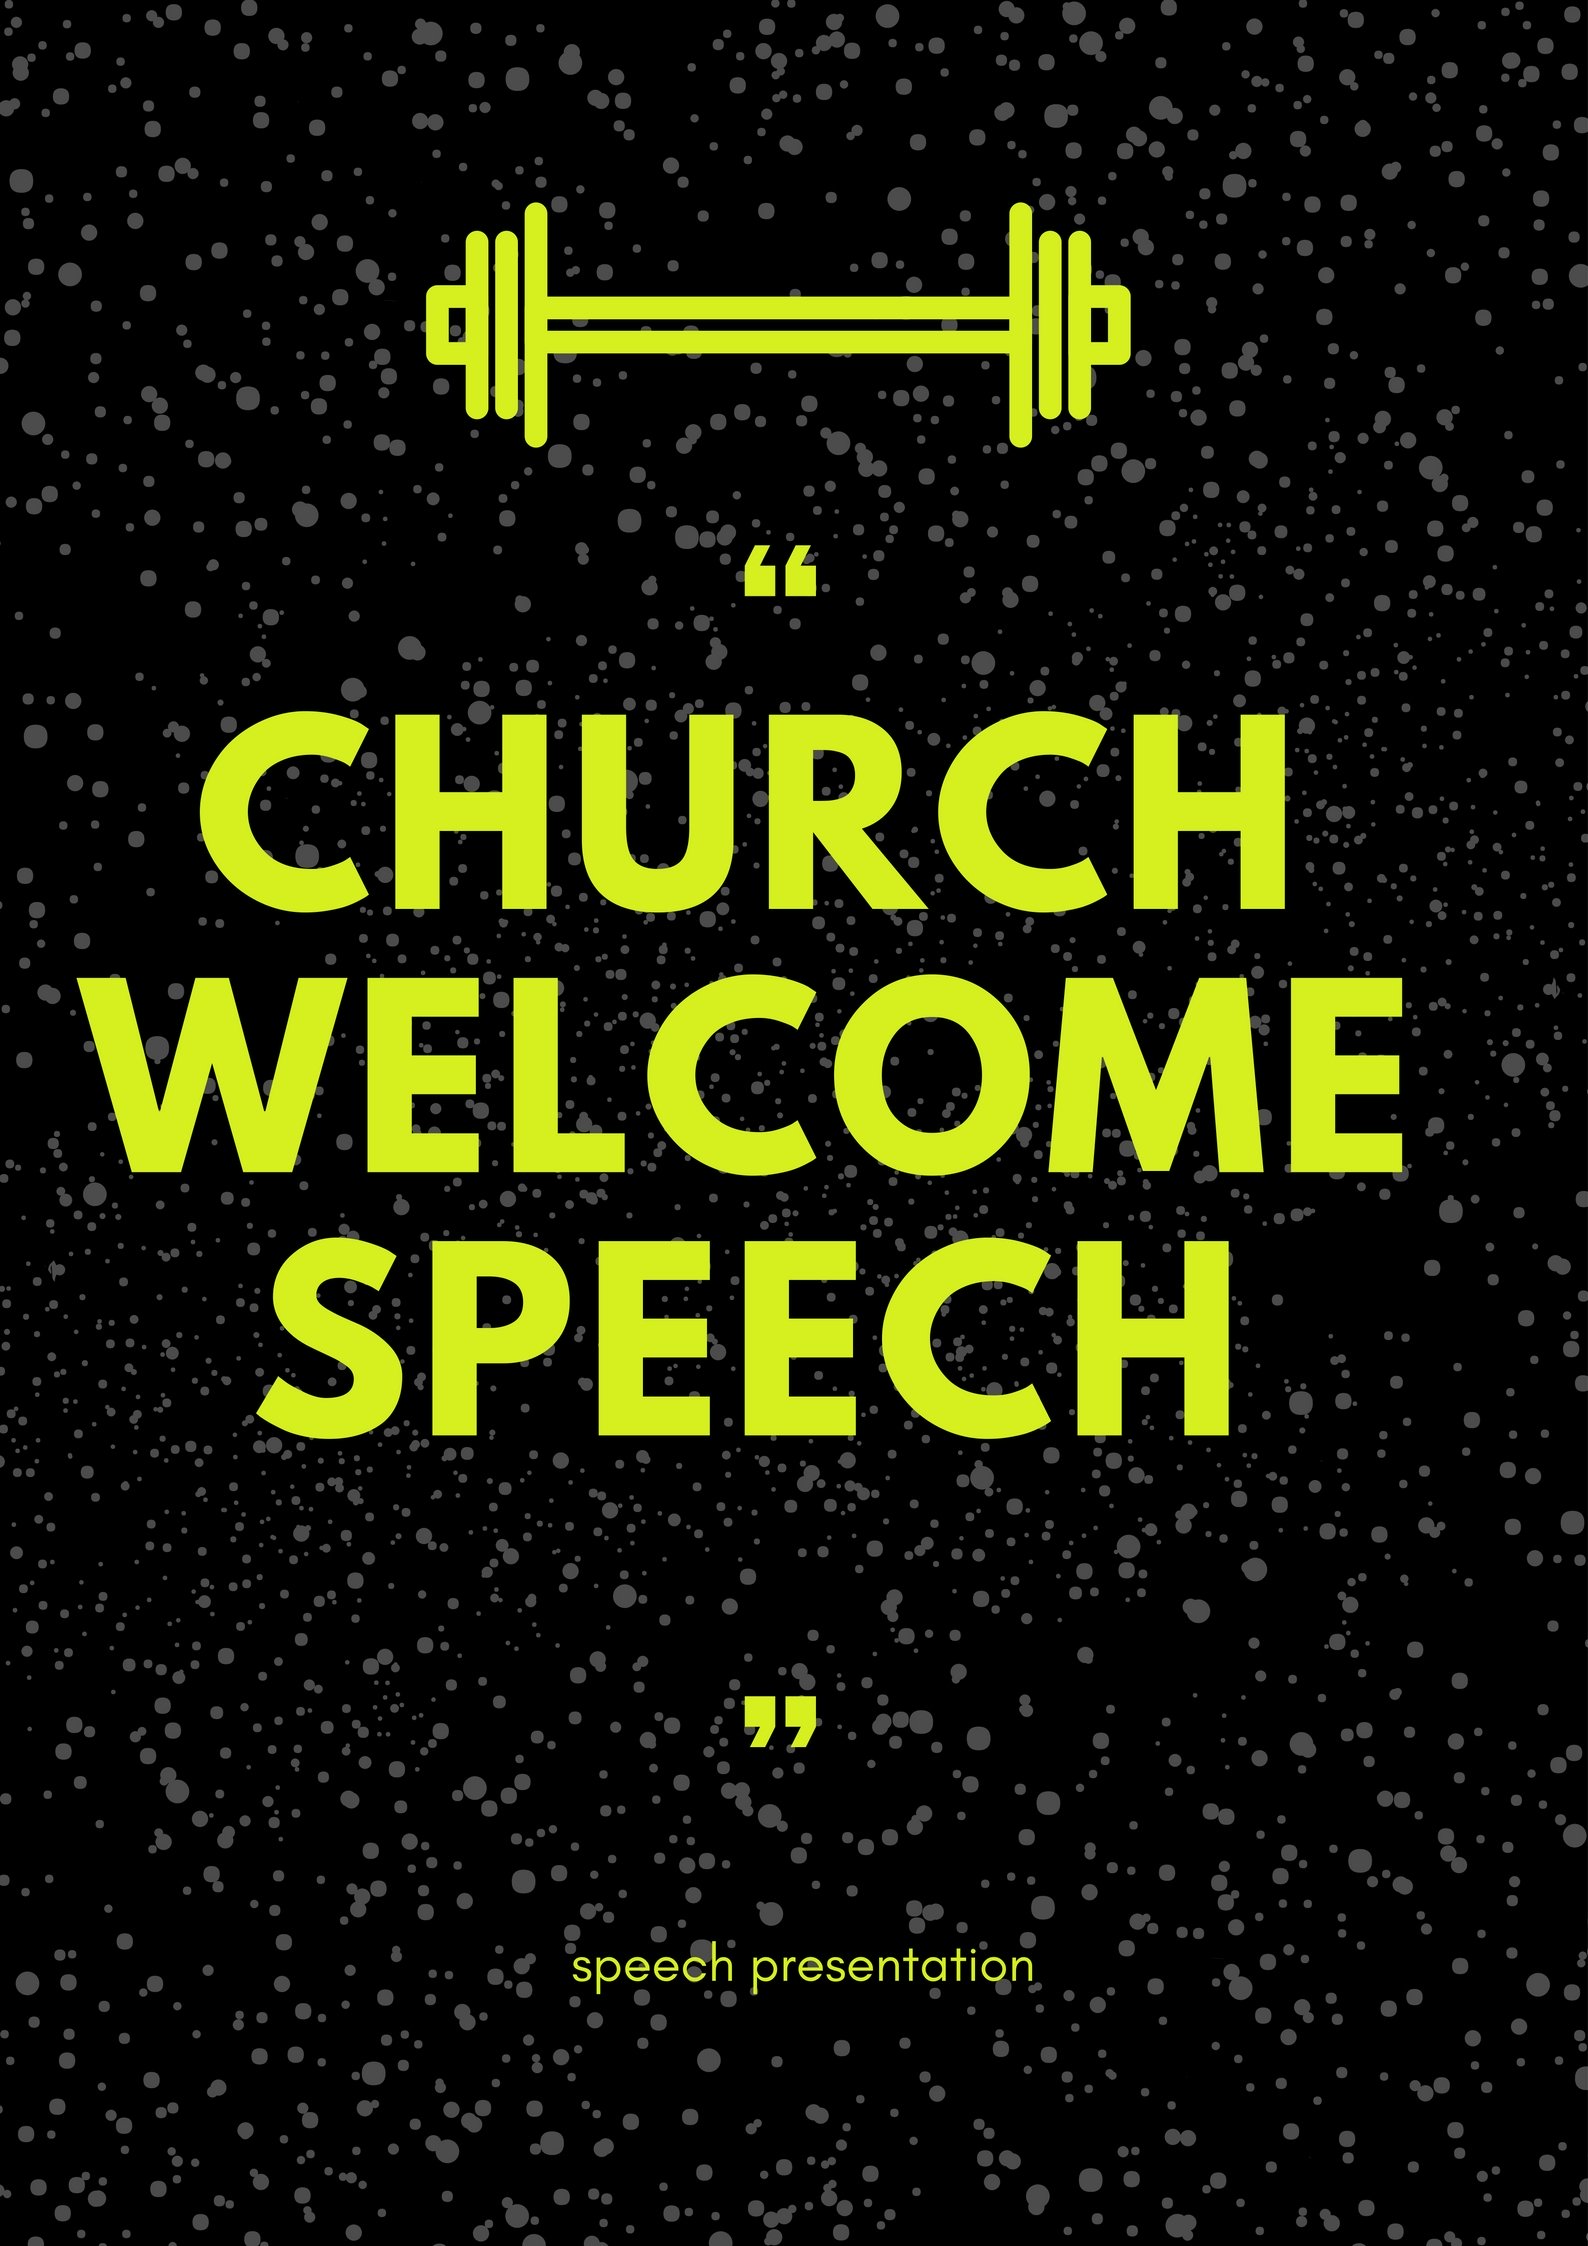 This is how to welcome visitors to your church. If you can looking for a way in which you can welcome visitors to your church. Visit our page now